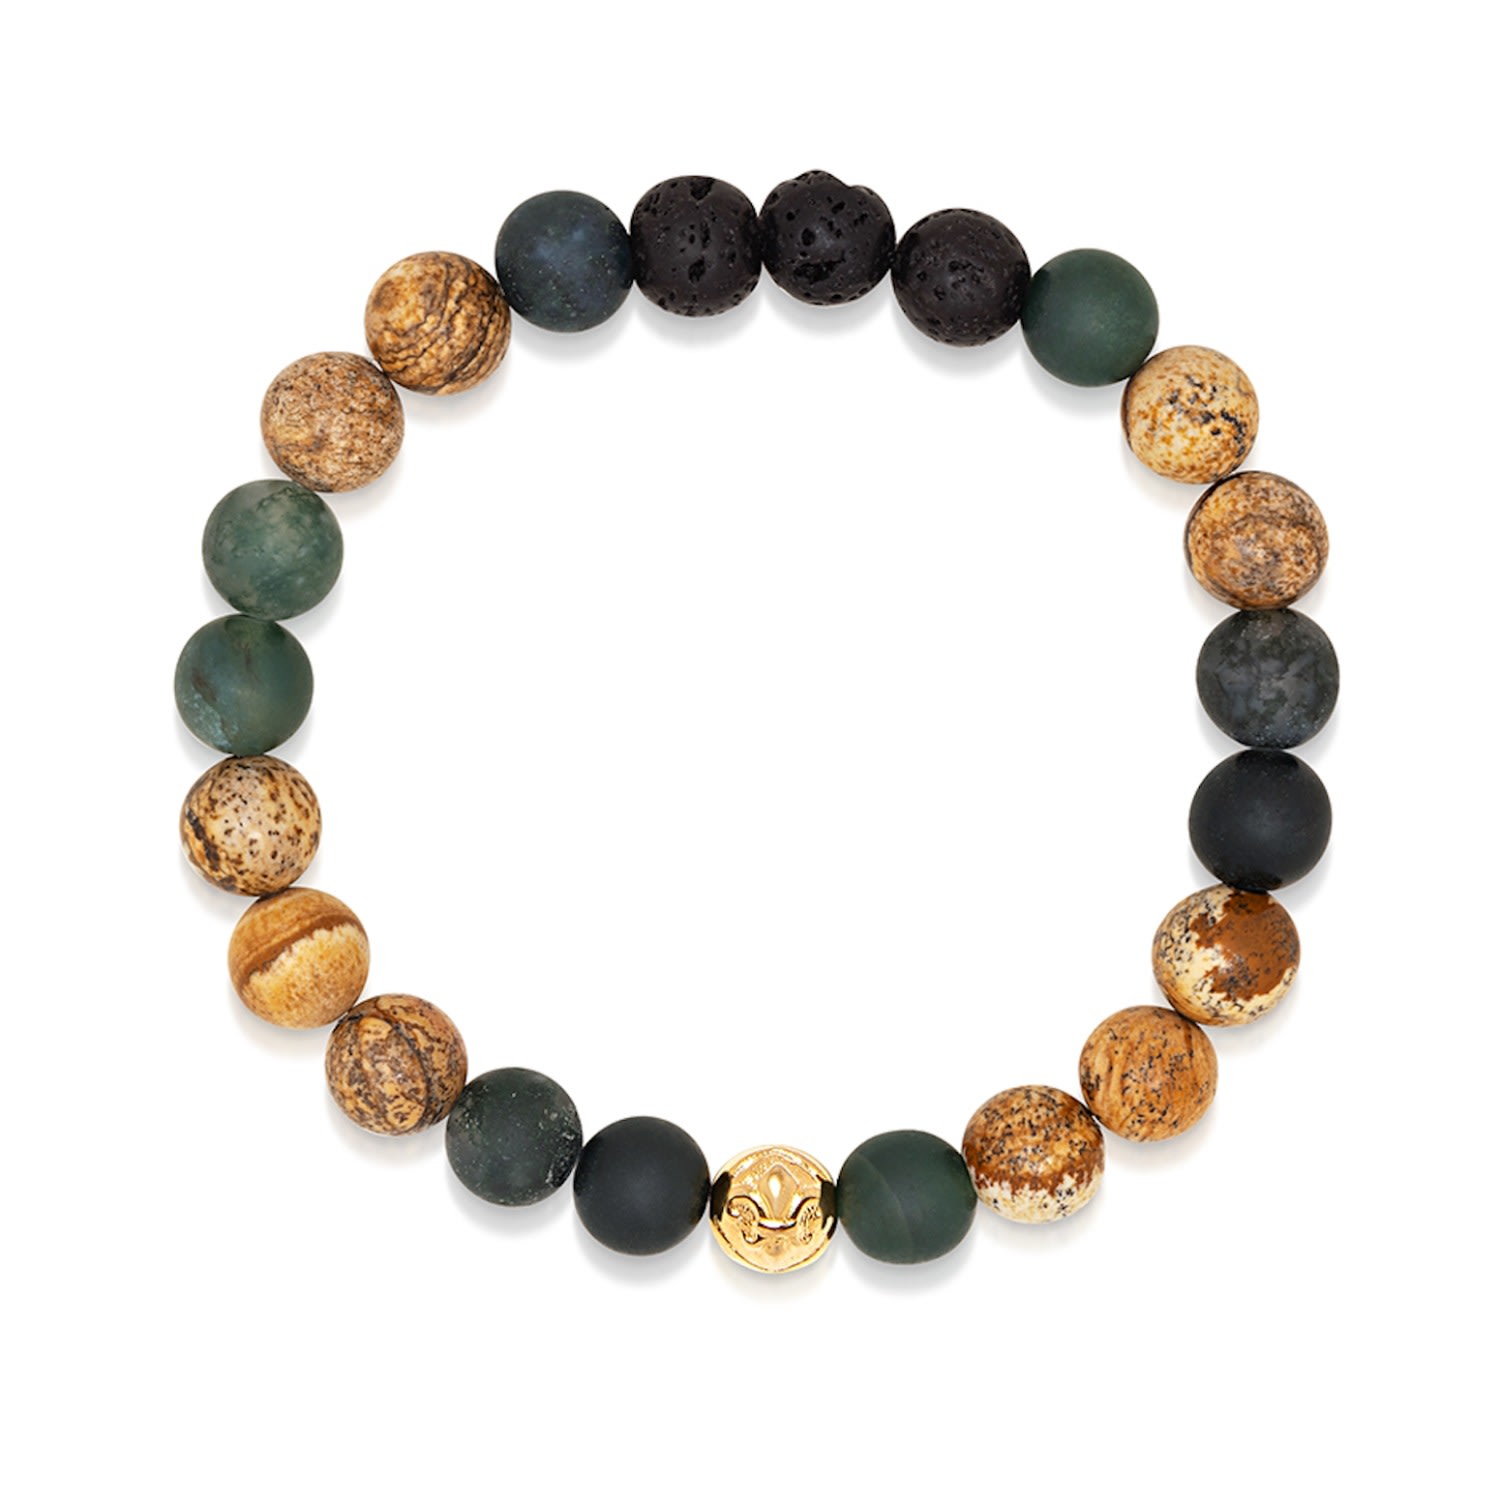 Nialaya Black / Gold / Green Mens Wristband With Jasper, Lava Stone, Matte Aquatic Agate And Gold In Brown